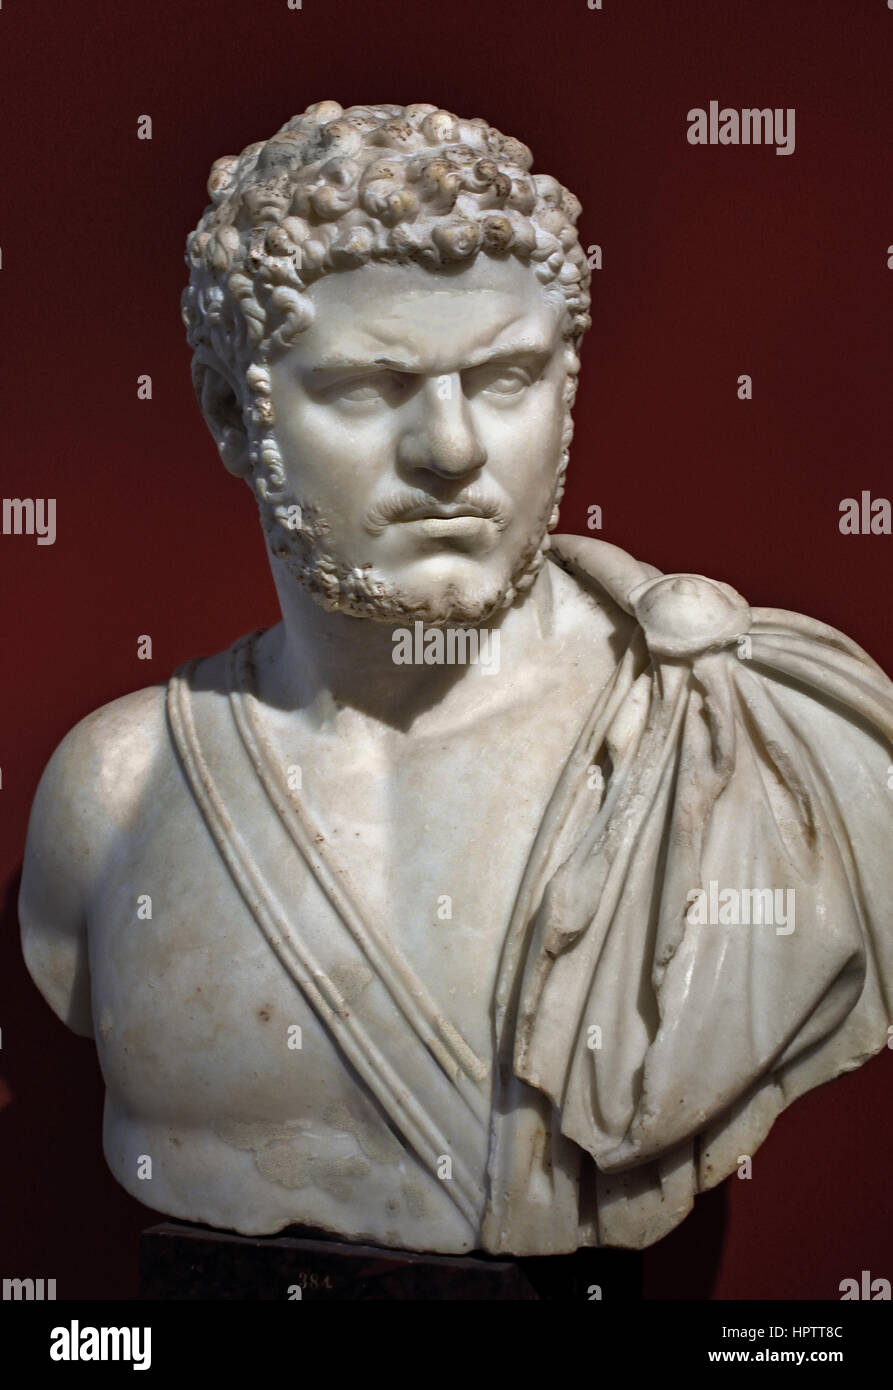 Emperor Caracalla. Roman marble bust from 212-217 AD Caracalla  188 –217 AD, formally Marcus Aurelius Severus Antoninus Augustus, was Roman emperor from AD 198 to 217. A member of the Severan Dynasty, he was the eldest son of Septimius Severus and Julia Domna. Stock Photo